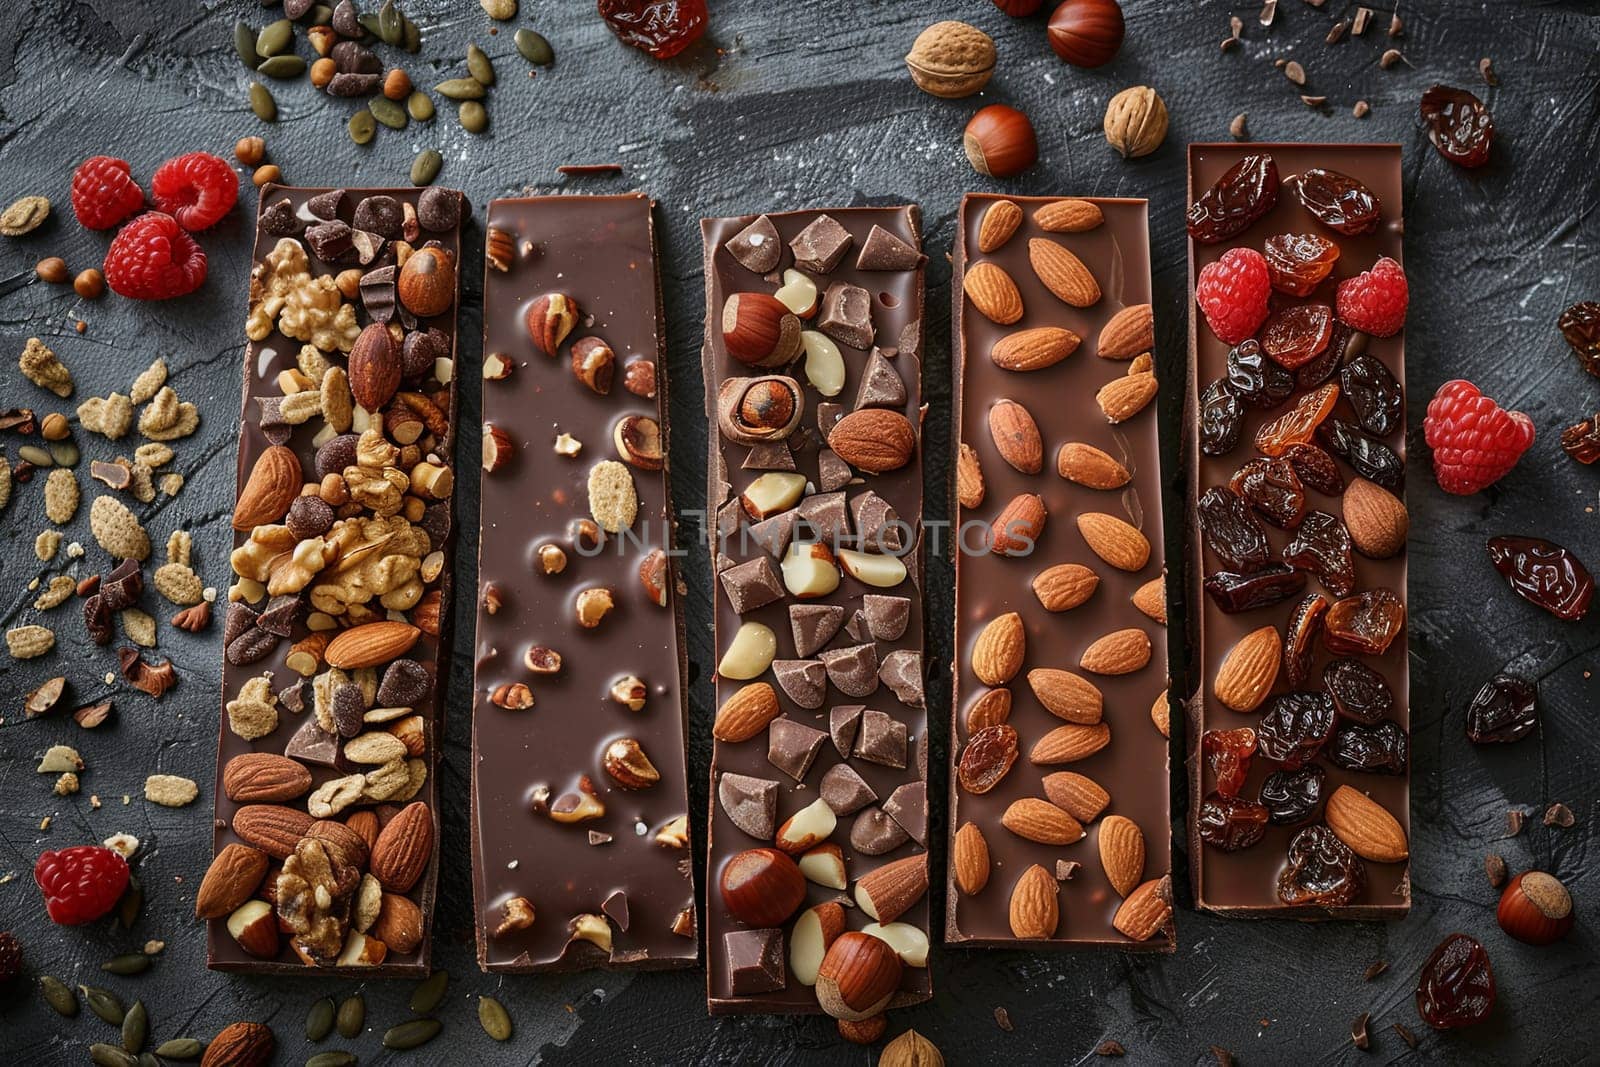 A display of chocolate bars topped with nuts and cranberries for a delicious and textured treat.